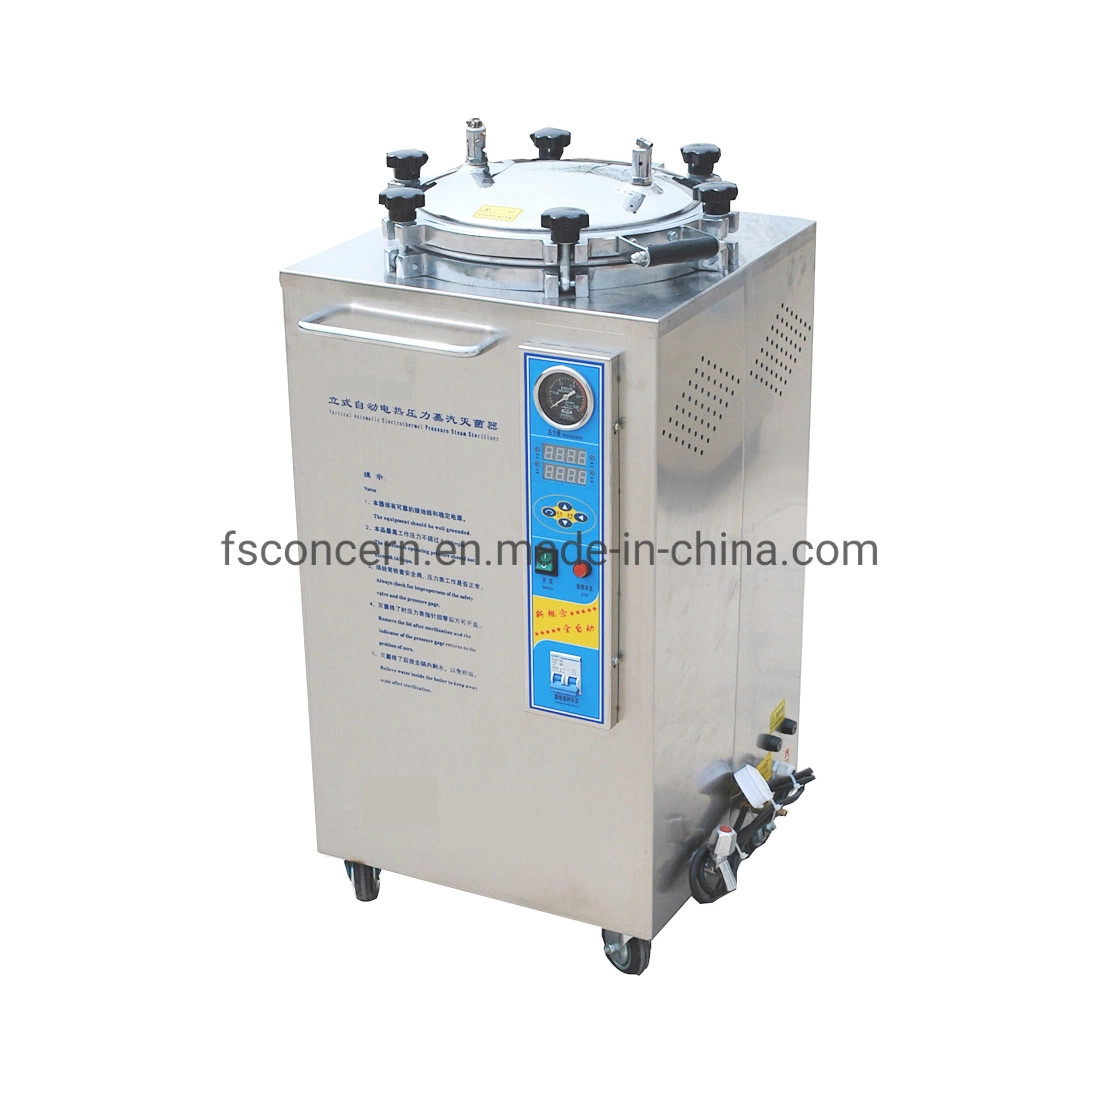 Medical Digital Stainless Steel Drying Function LCD Display Disinfect Sterilizer Equipment